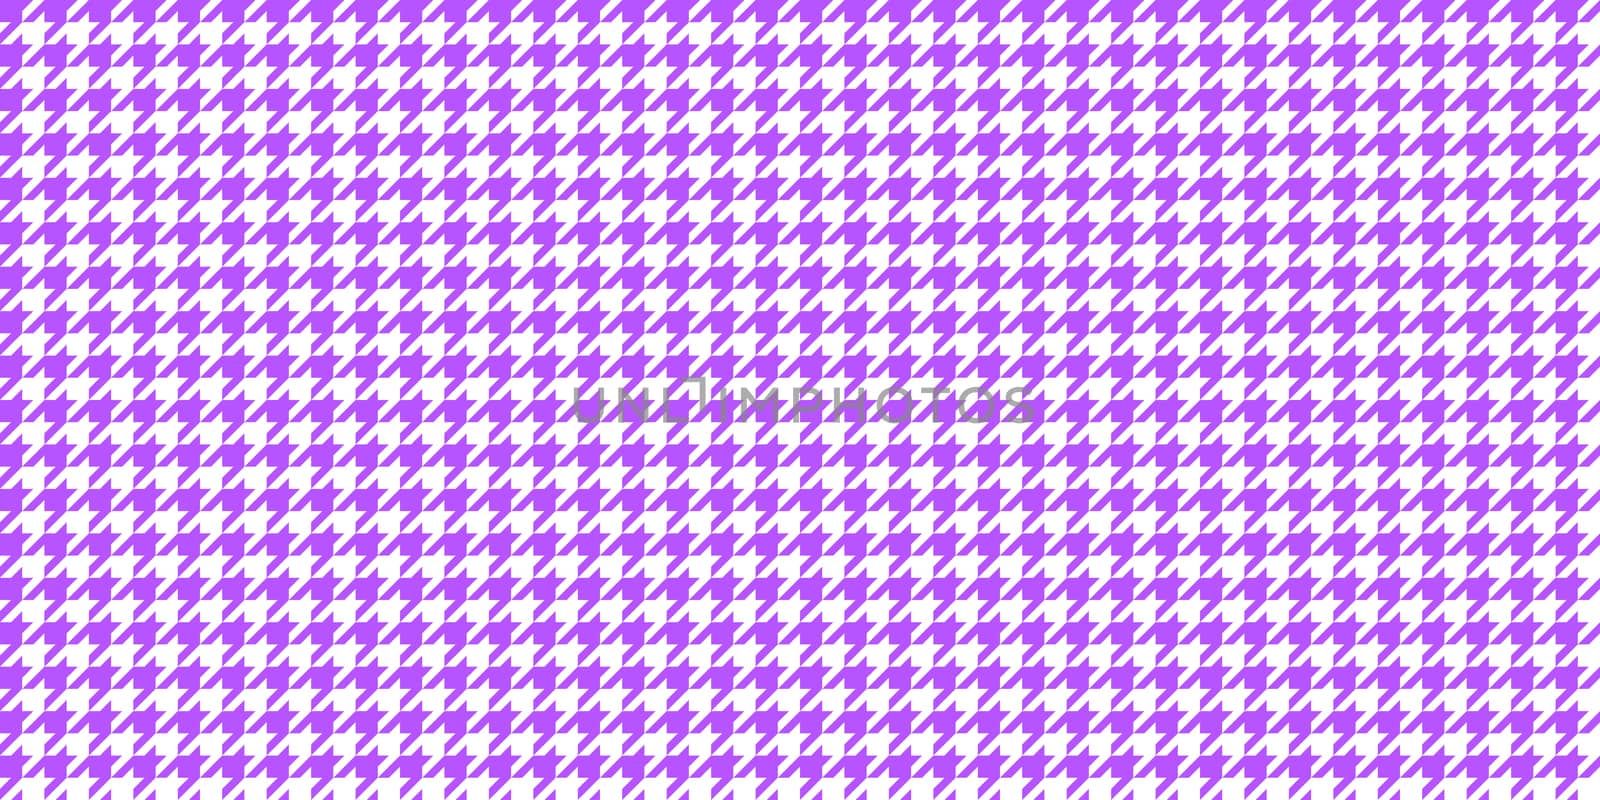 Lilac Seamless Houndstooth Pattern Background. Traditional Arab Texture. Fabric Textile Material.